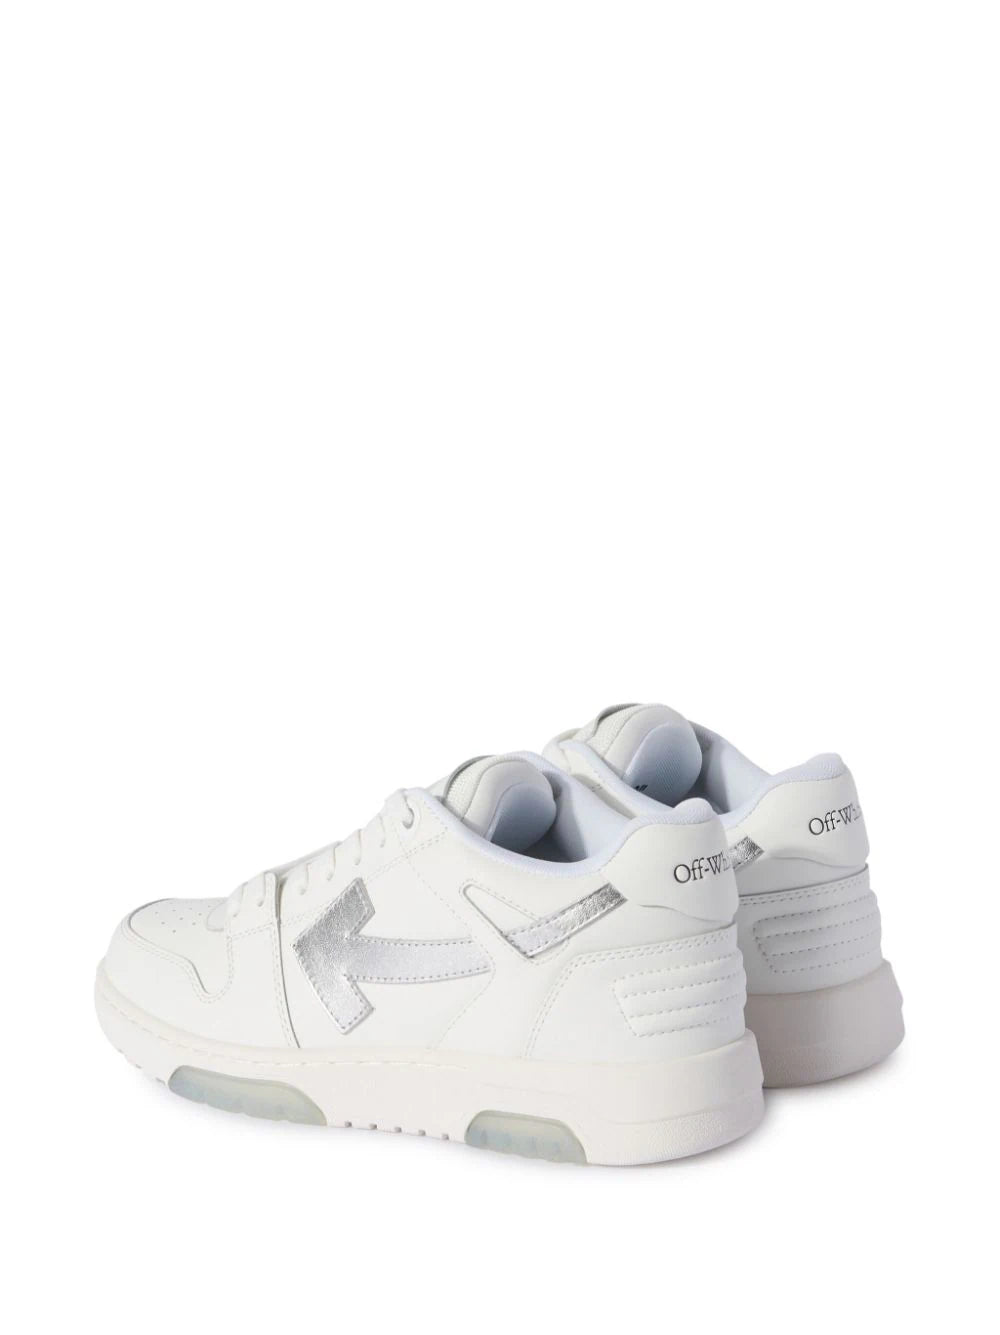 OFF-WHITE WOMEN Out Of Office Calf Leather Sneakers White/Silver - MAISONDEFASHION.COM